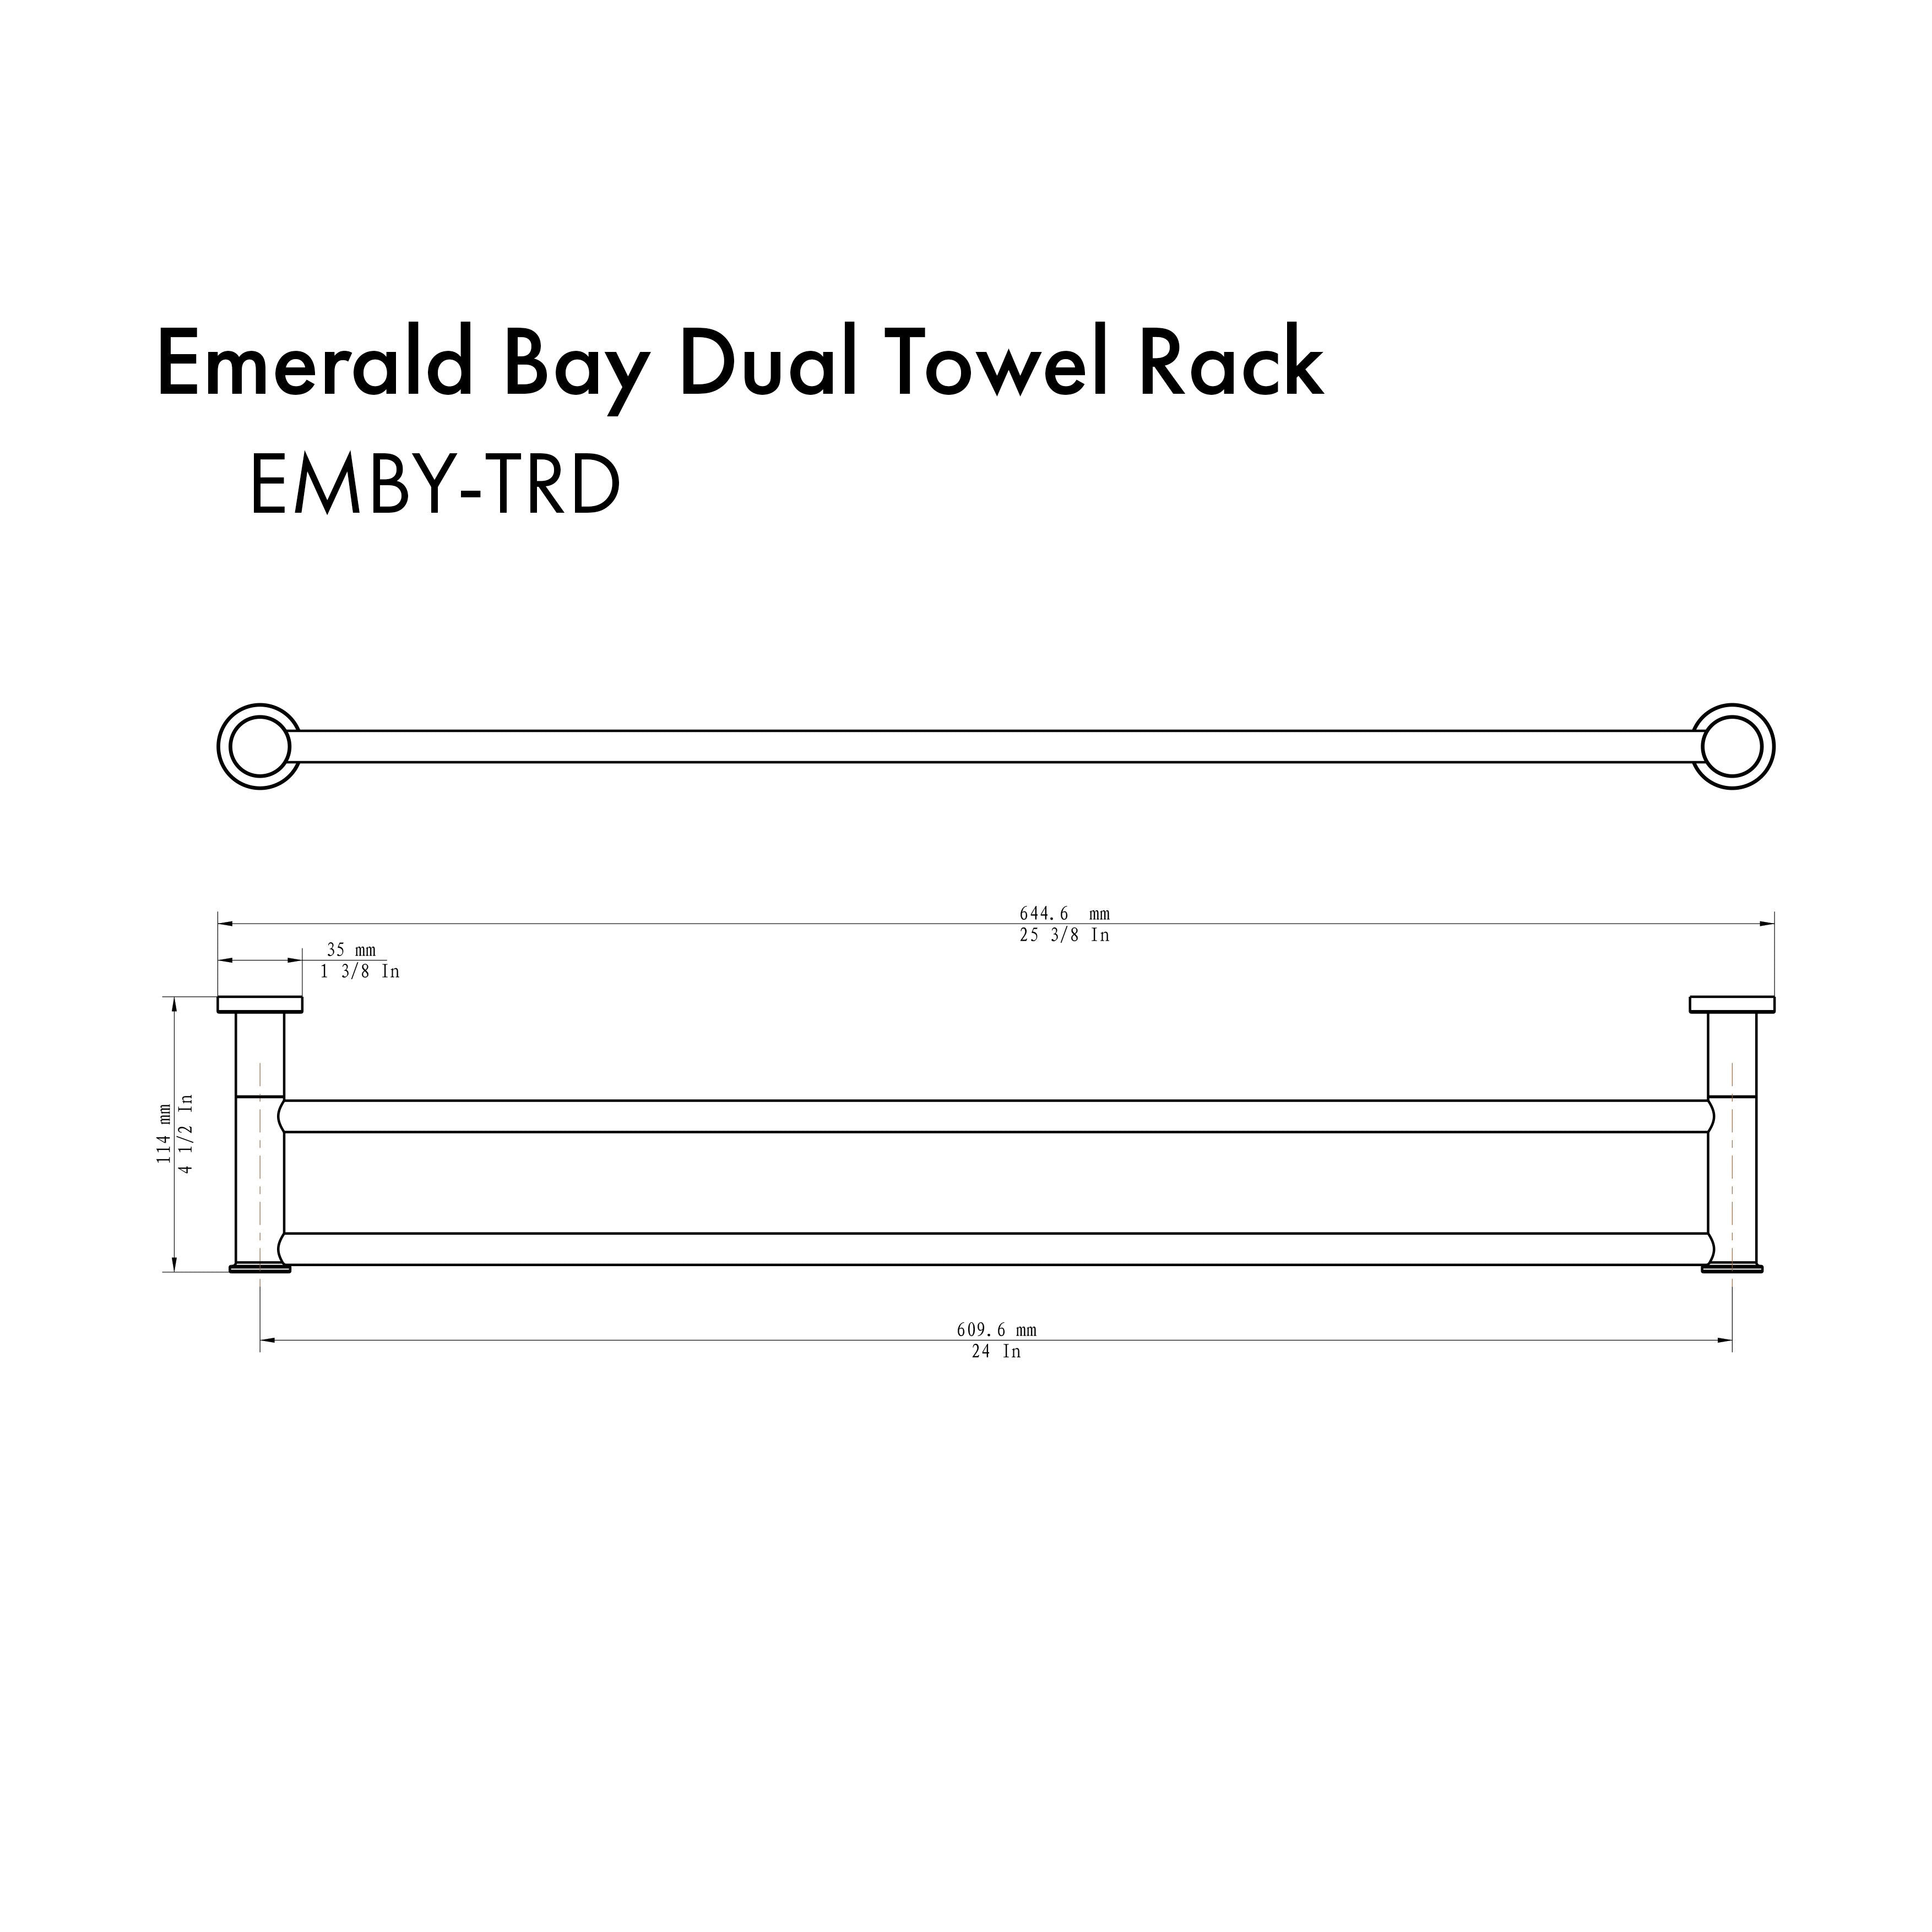 Therangehoodstore.com, ZLINE Emerald Bay Double Towel Rail with color options (EMBY-TRD), EMBY-TRD-BN,